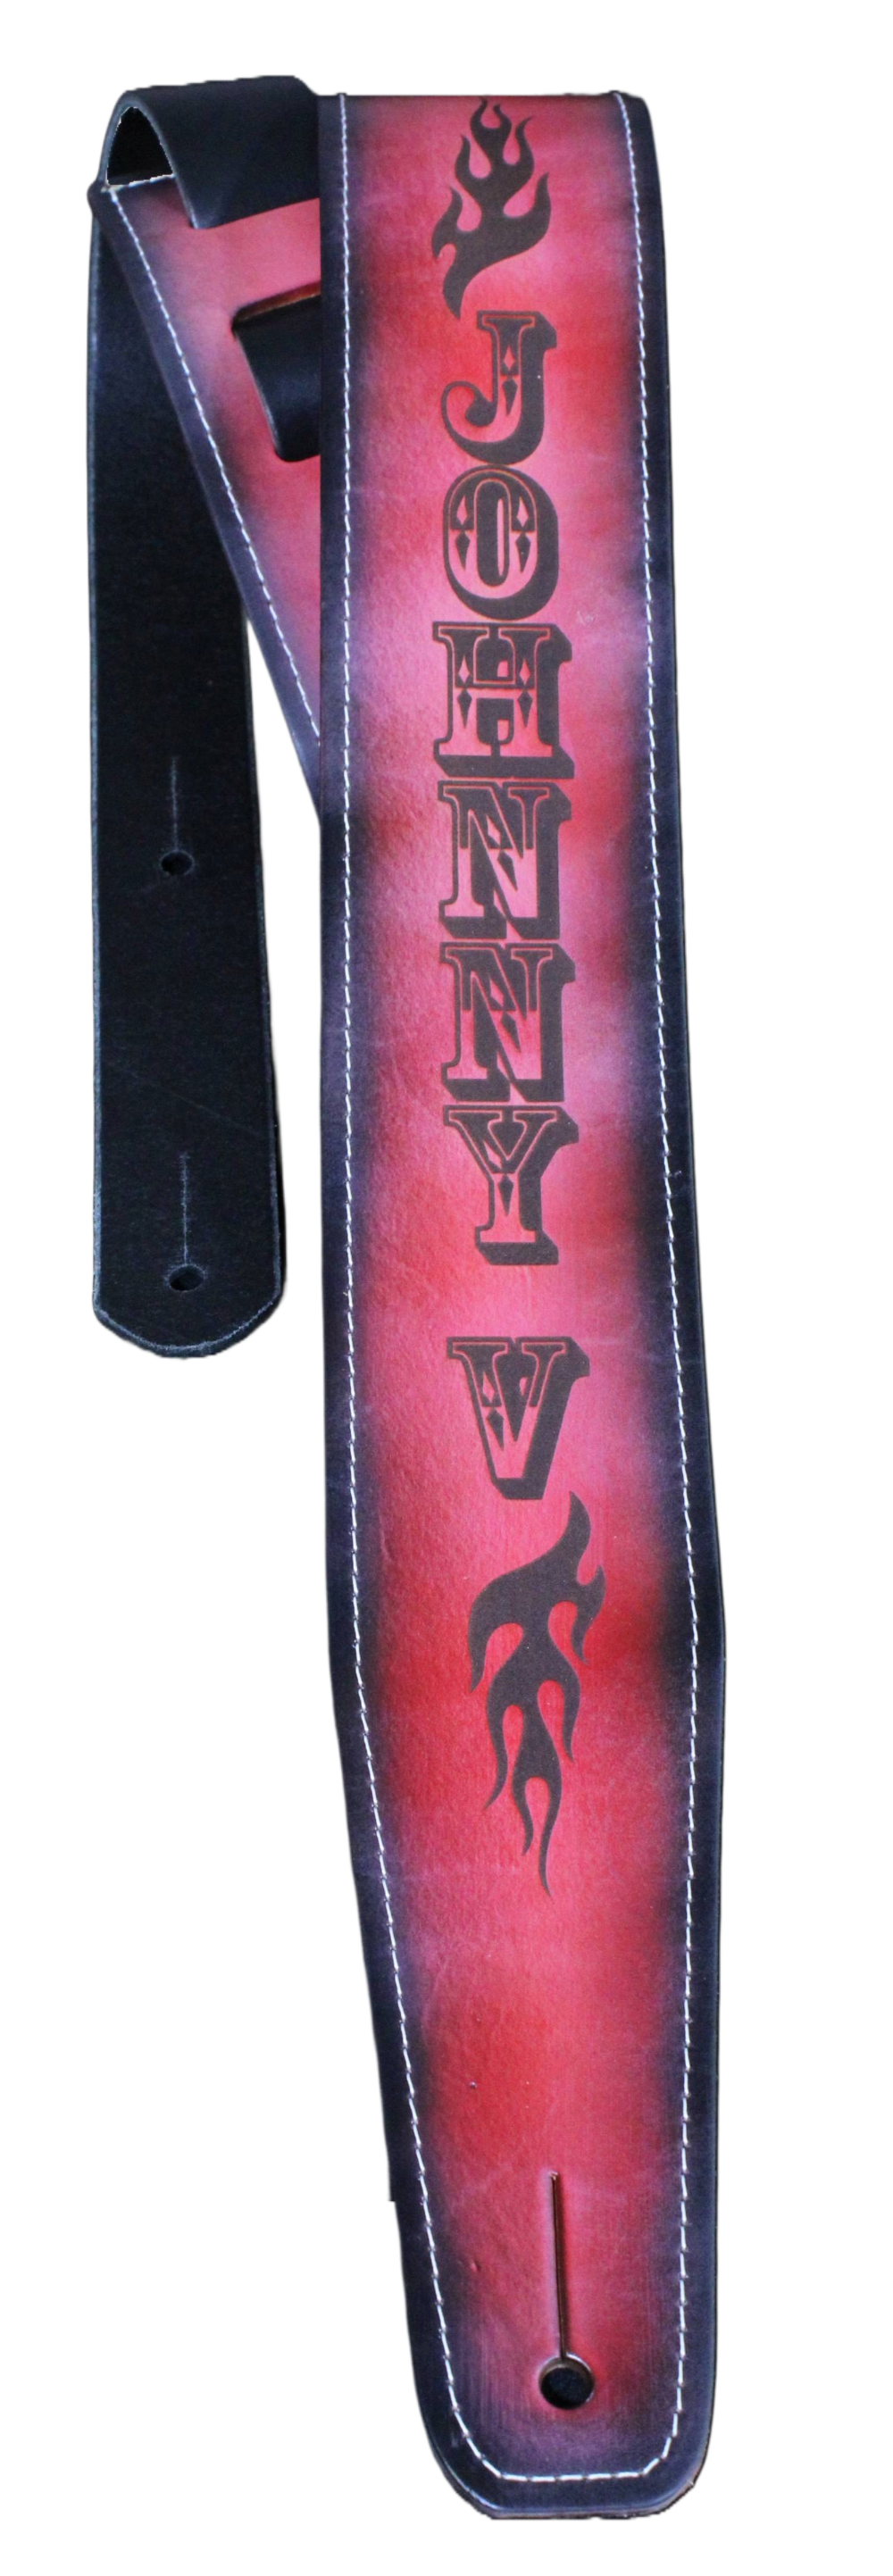 Stitched red leather guitar strap